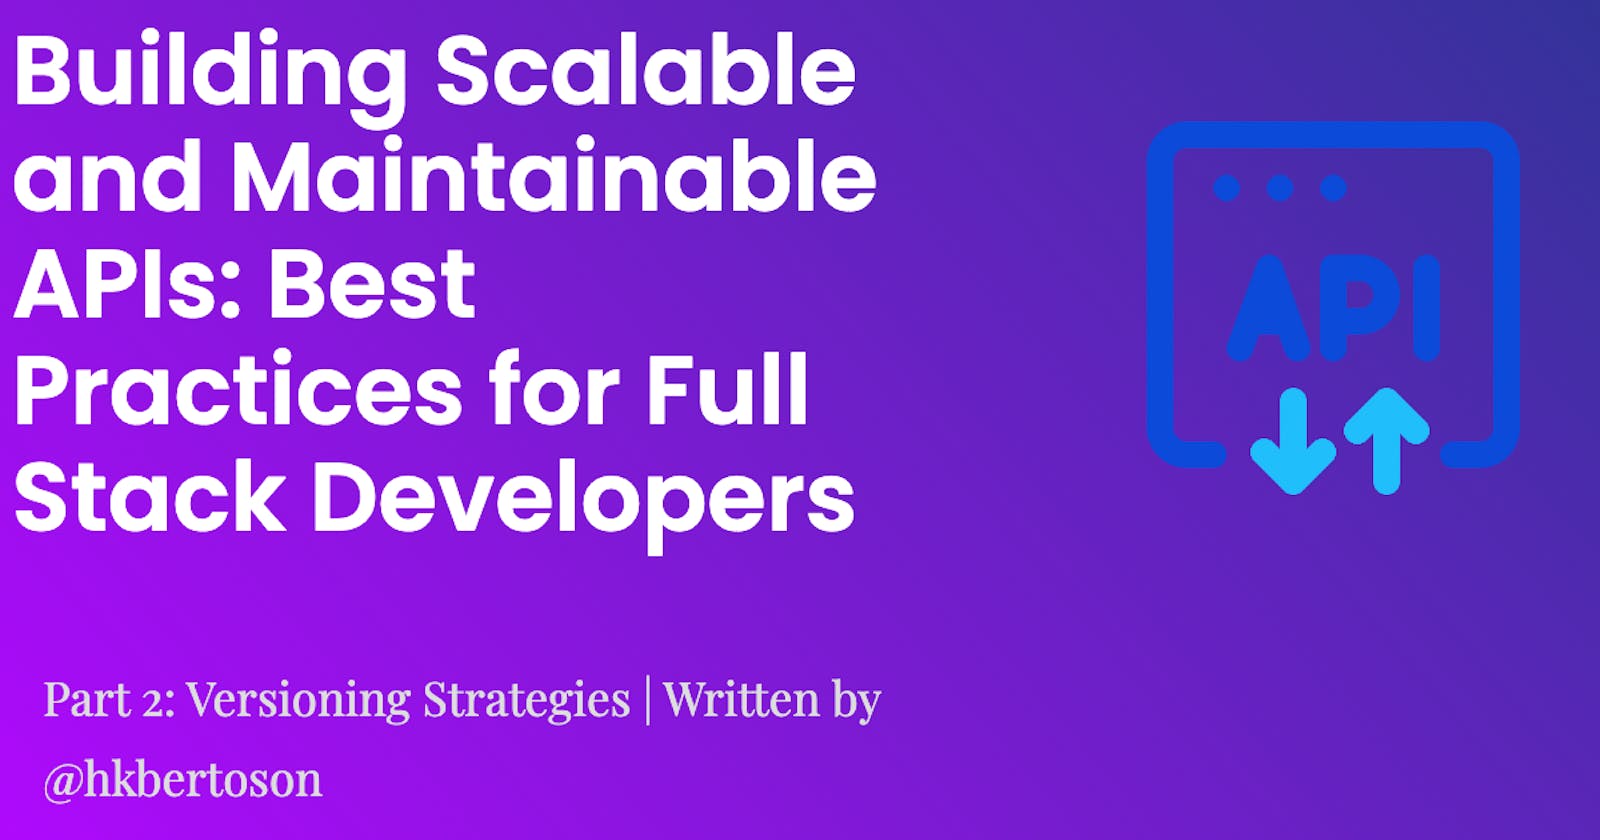 Building Scalable and Maintainable APIs: Best Practices for Full Stack Developers